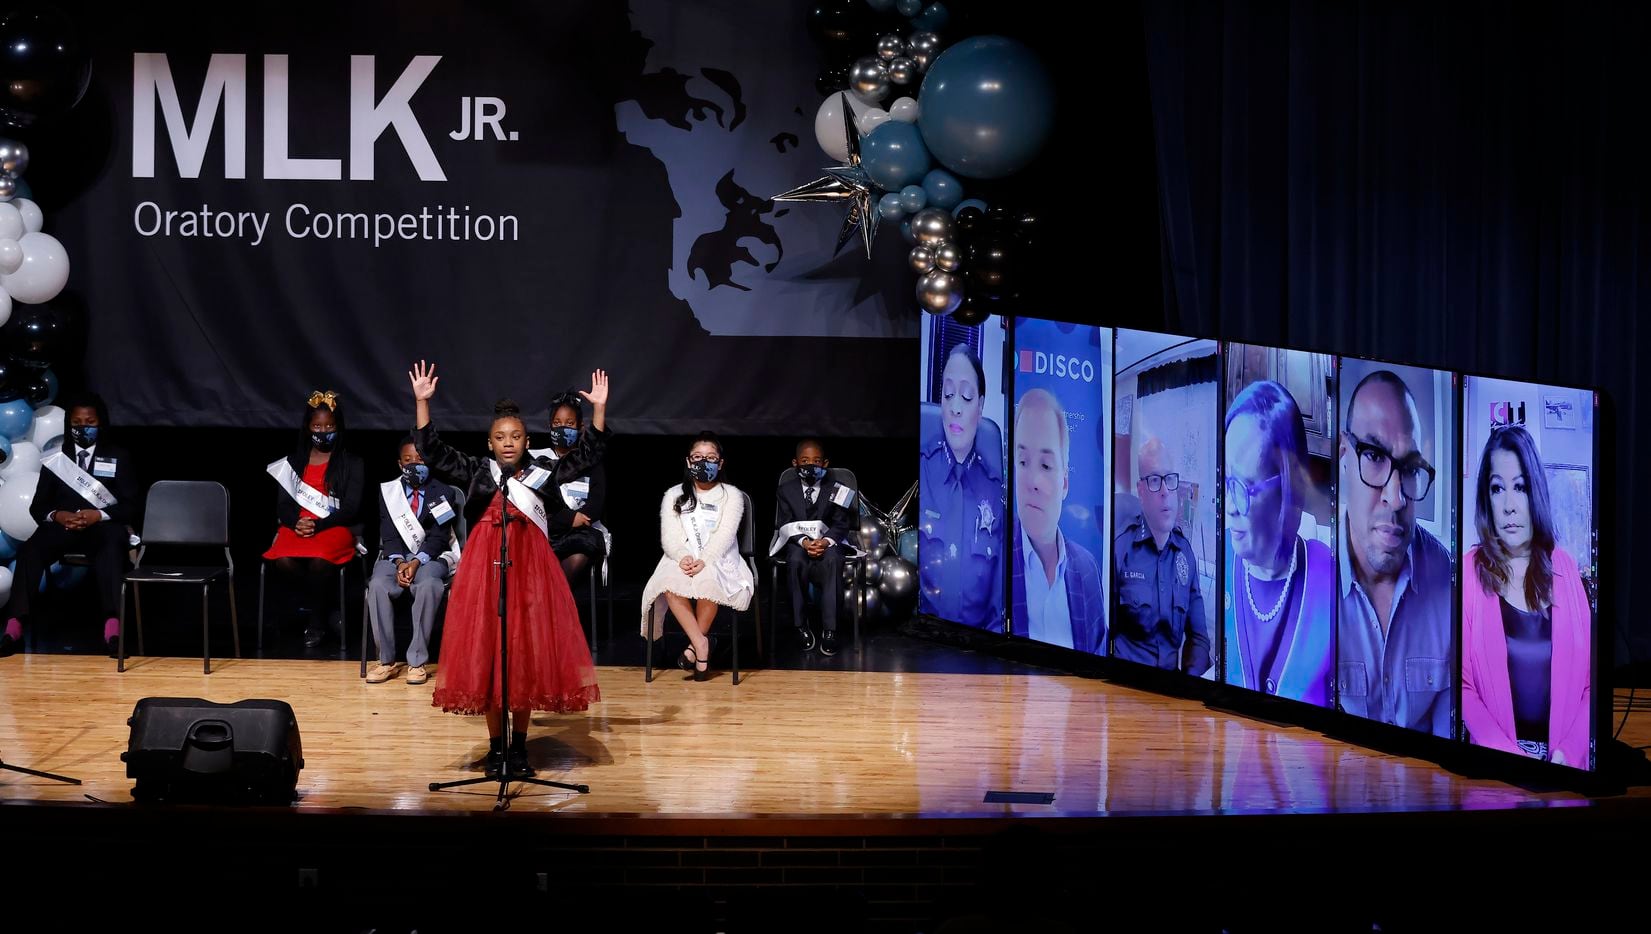 Fifth grader Jaliaha Rodgers of JP Sparks Math, Science and Technology Vanguard delivers her speech before virtual judges (right) during the 30th Annual Foley & Lardner MLK Jr. Oratory Competition at W.H. Adamson High School in Dallas, January 14, 2022. She was runner-up in the competition.